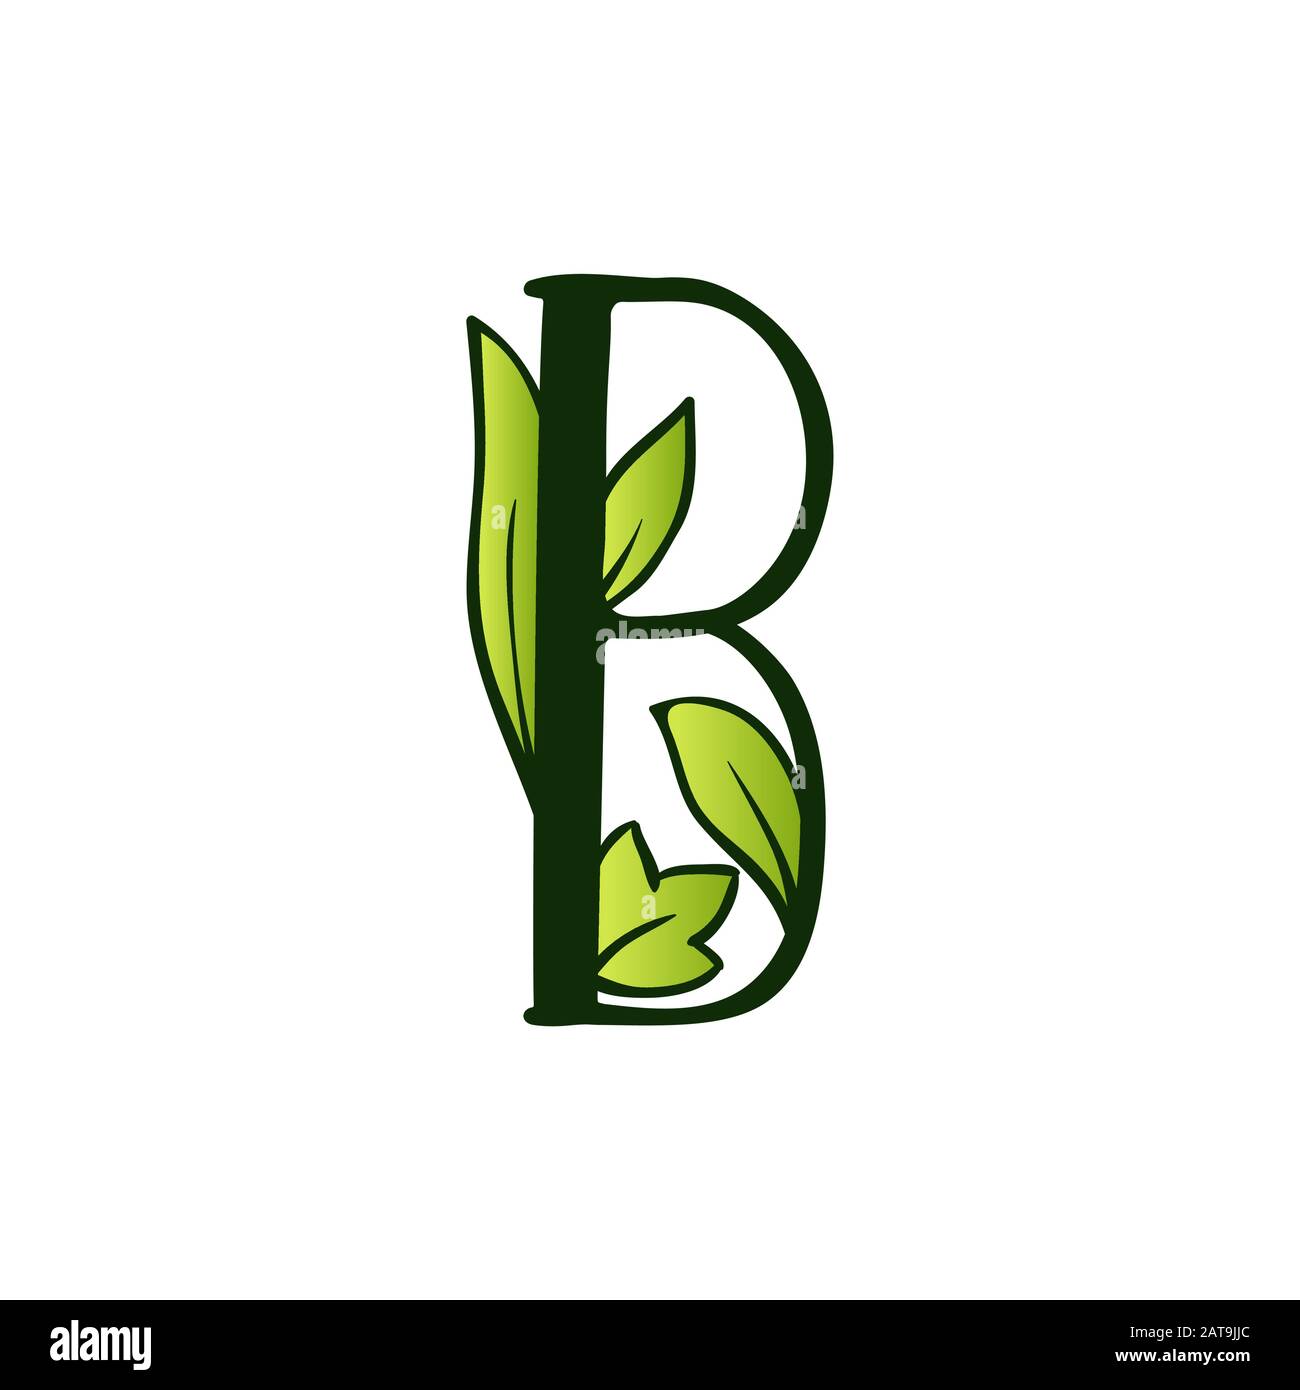 https://c8.alamy.com/comp/2AT9JJC/green-doodling-eco-alphabet-letter-btype-with-leaves-isolated-latin-uppercase-typography-bold-spring-letter-or-doodle-abc-characters-for-monogram-words-and-logo-2AT9JJC.jpg